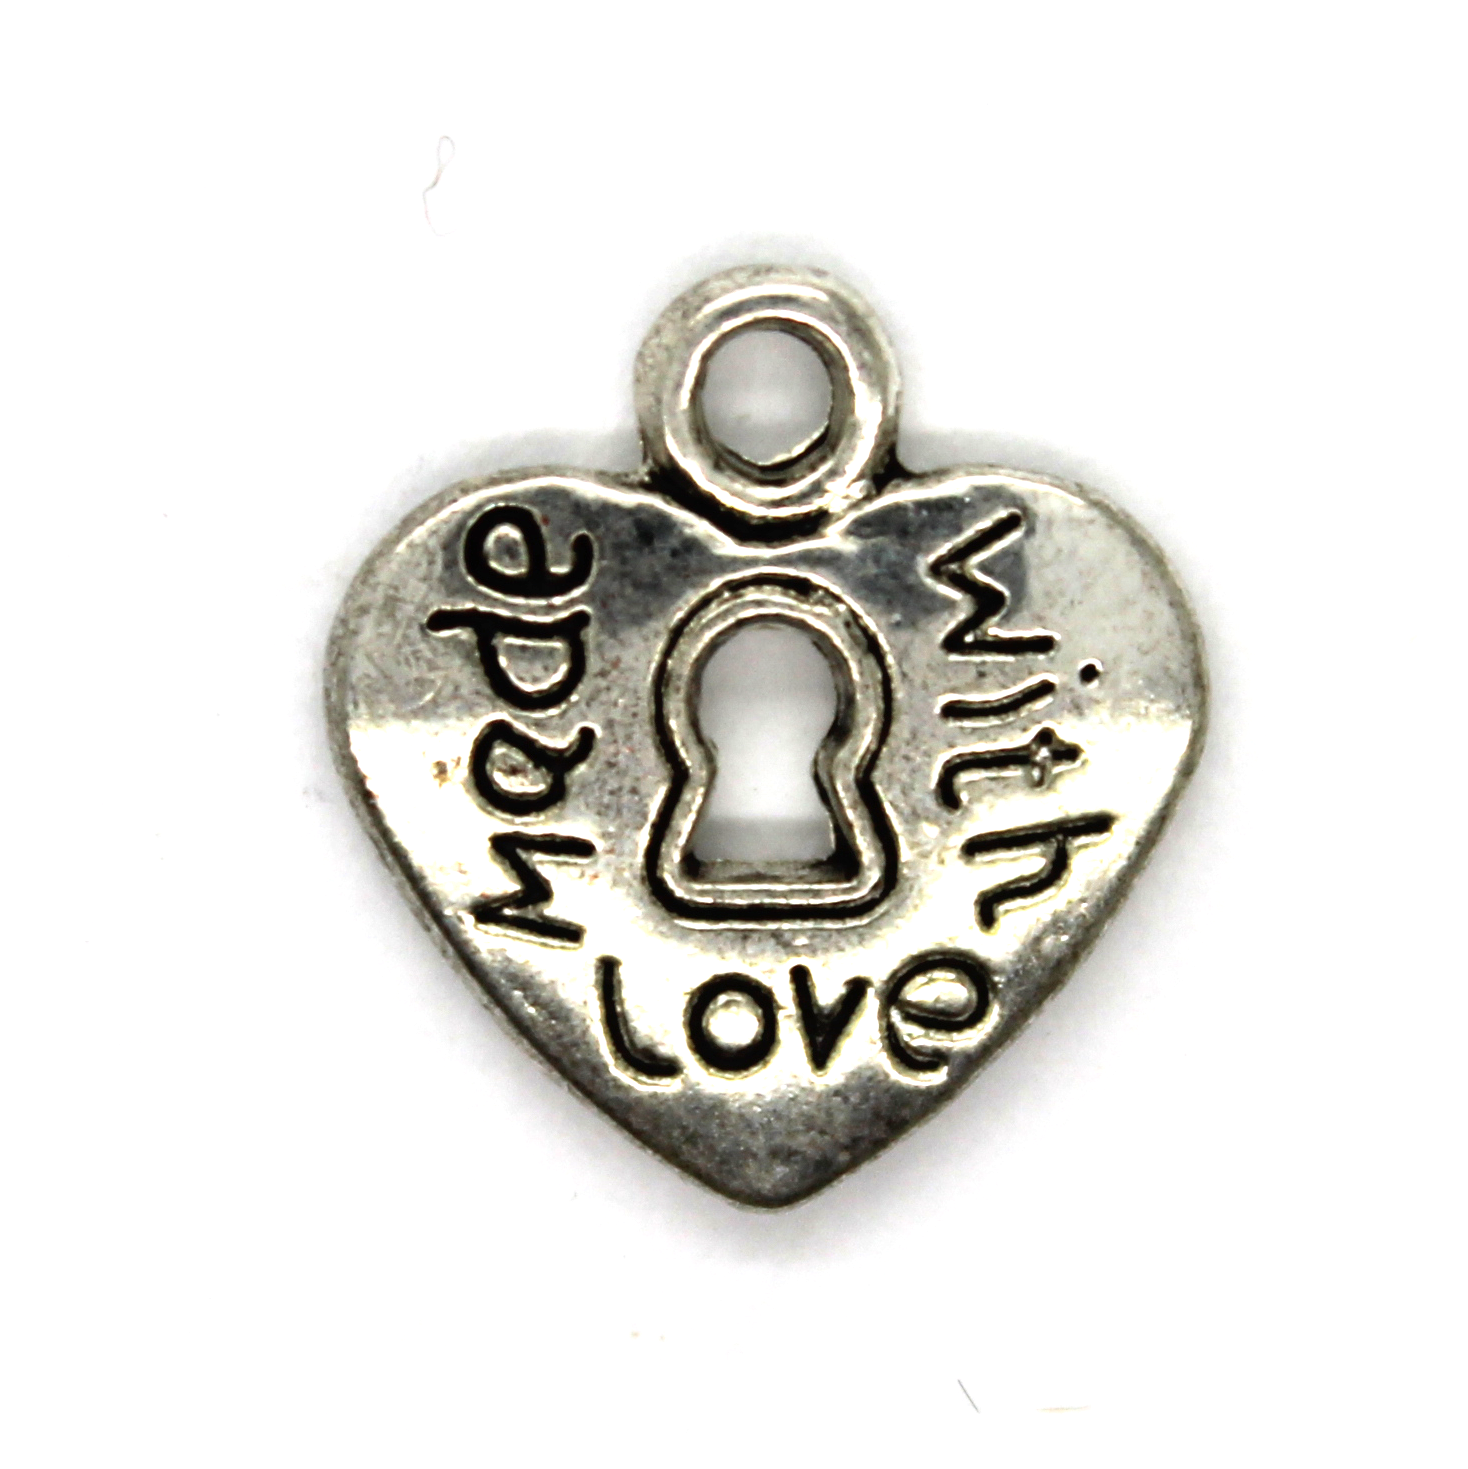 Charms, Keyhole Heart Made With Love, Silver, Alloy, 13mm X 12mm, Sold Per pkg of 6